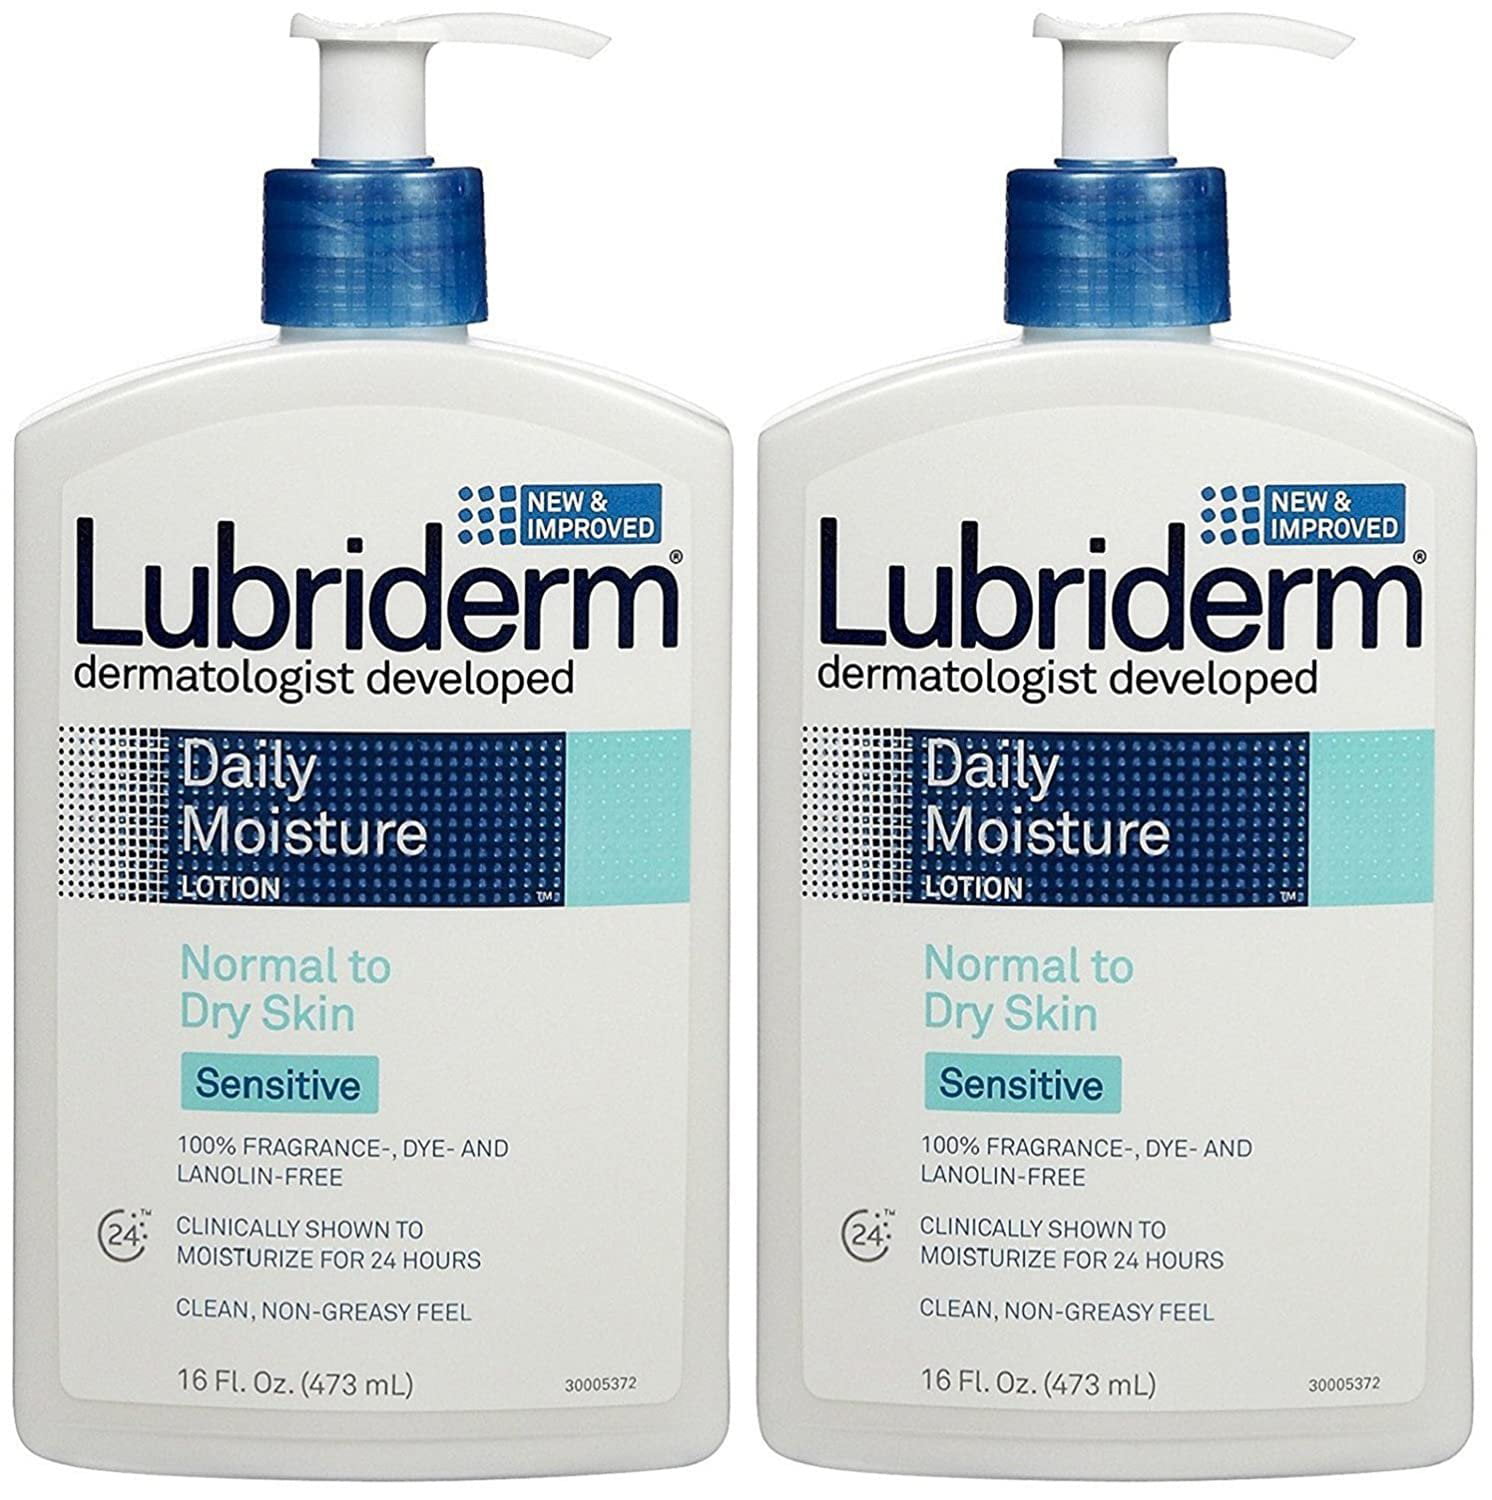 Lubriderm Sensitive Skin Therapy Moisturizing Lotion For Dry Skin 16